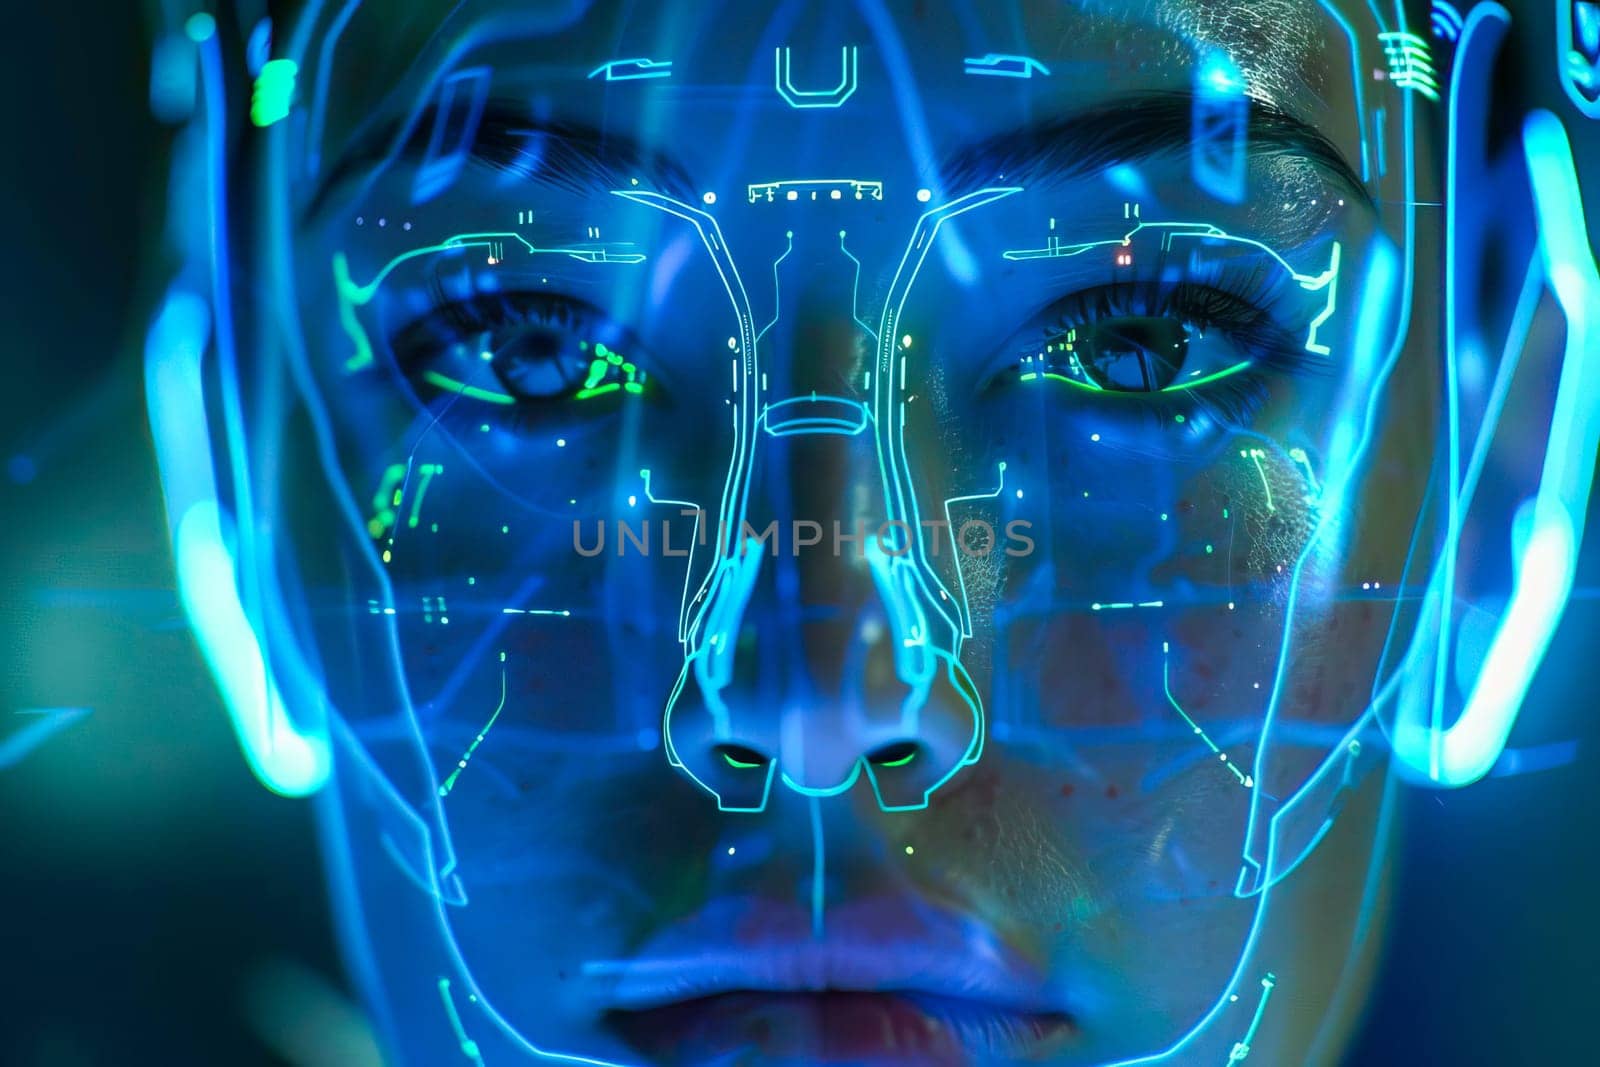 A womans face illuminated by glowing blue lines.